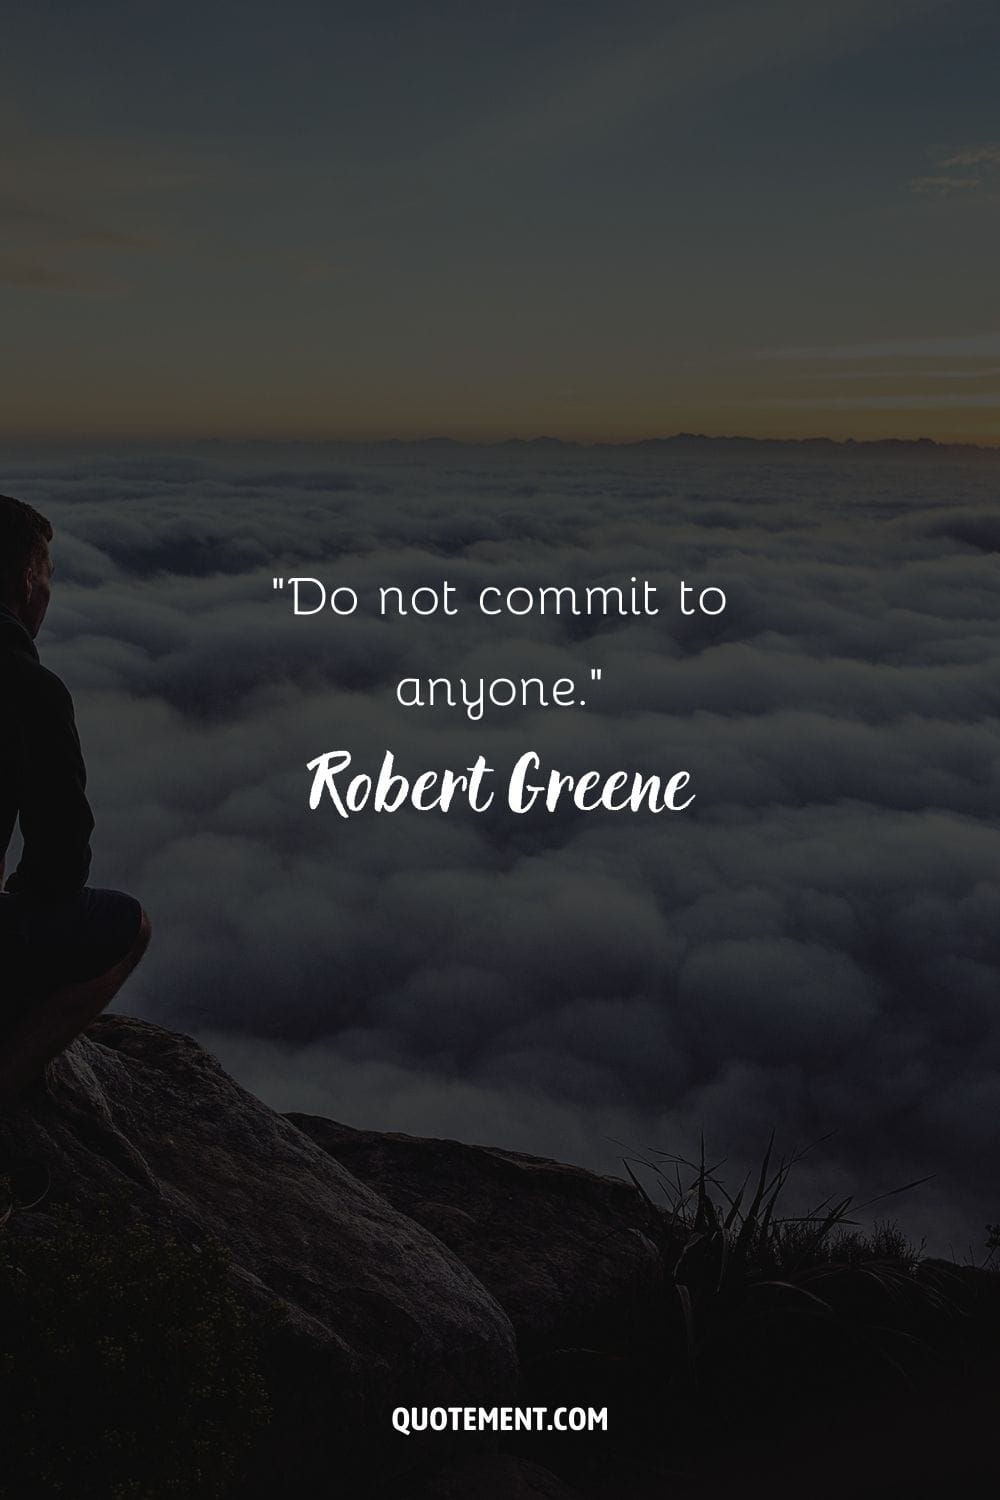 “Do not commit to anyone.” ― Robert Greene, The 48 Laws of Power